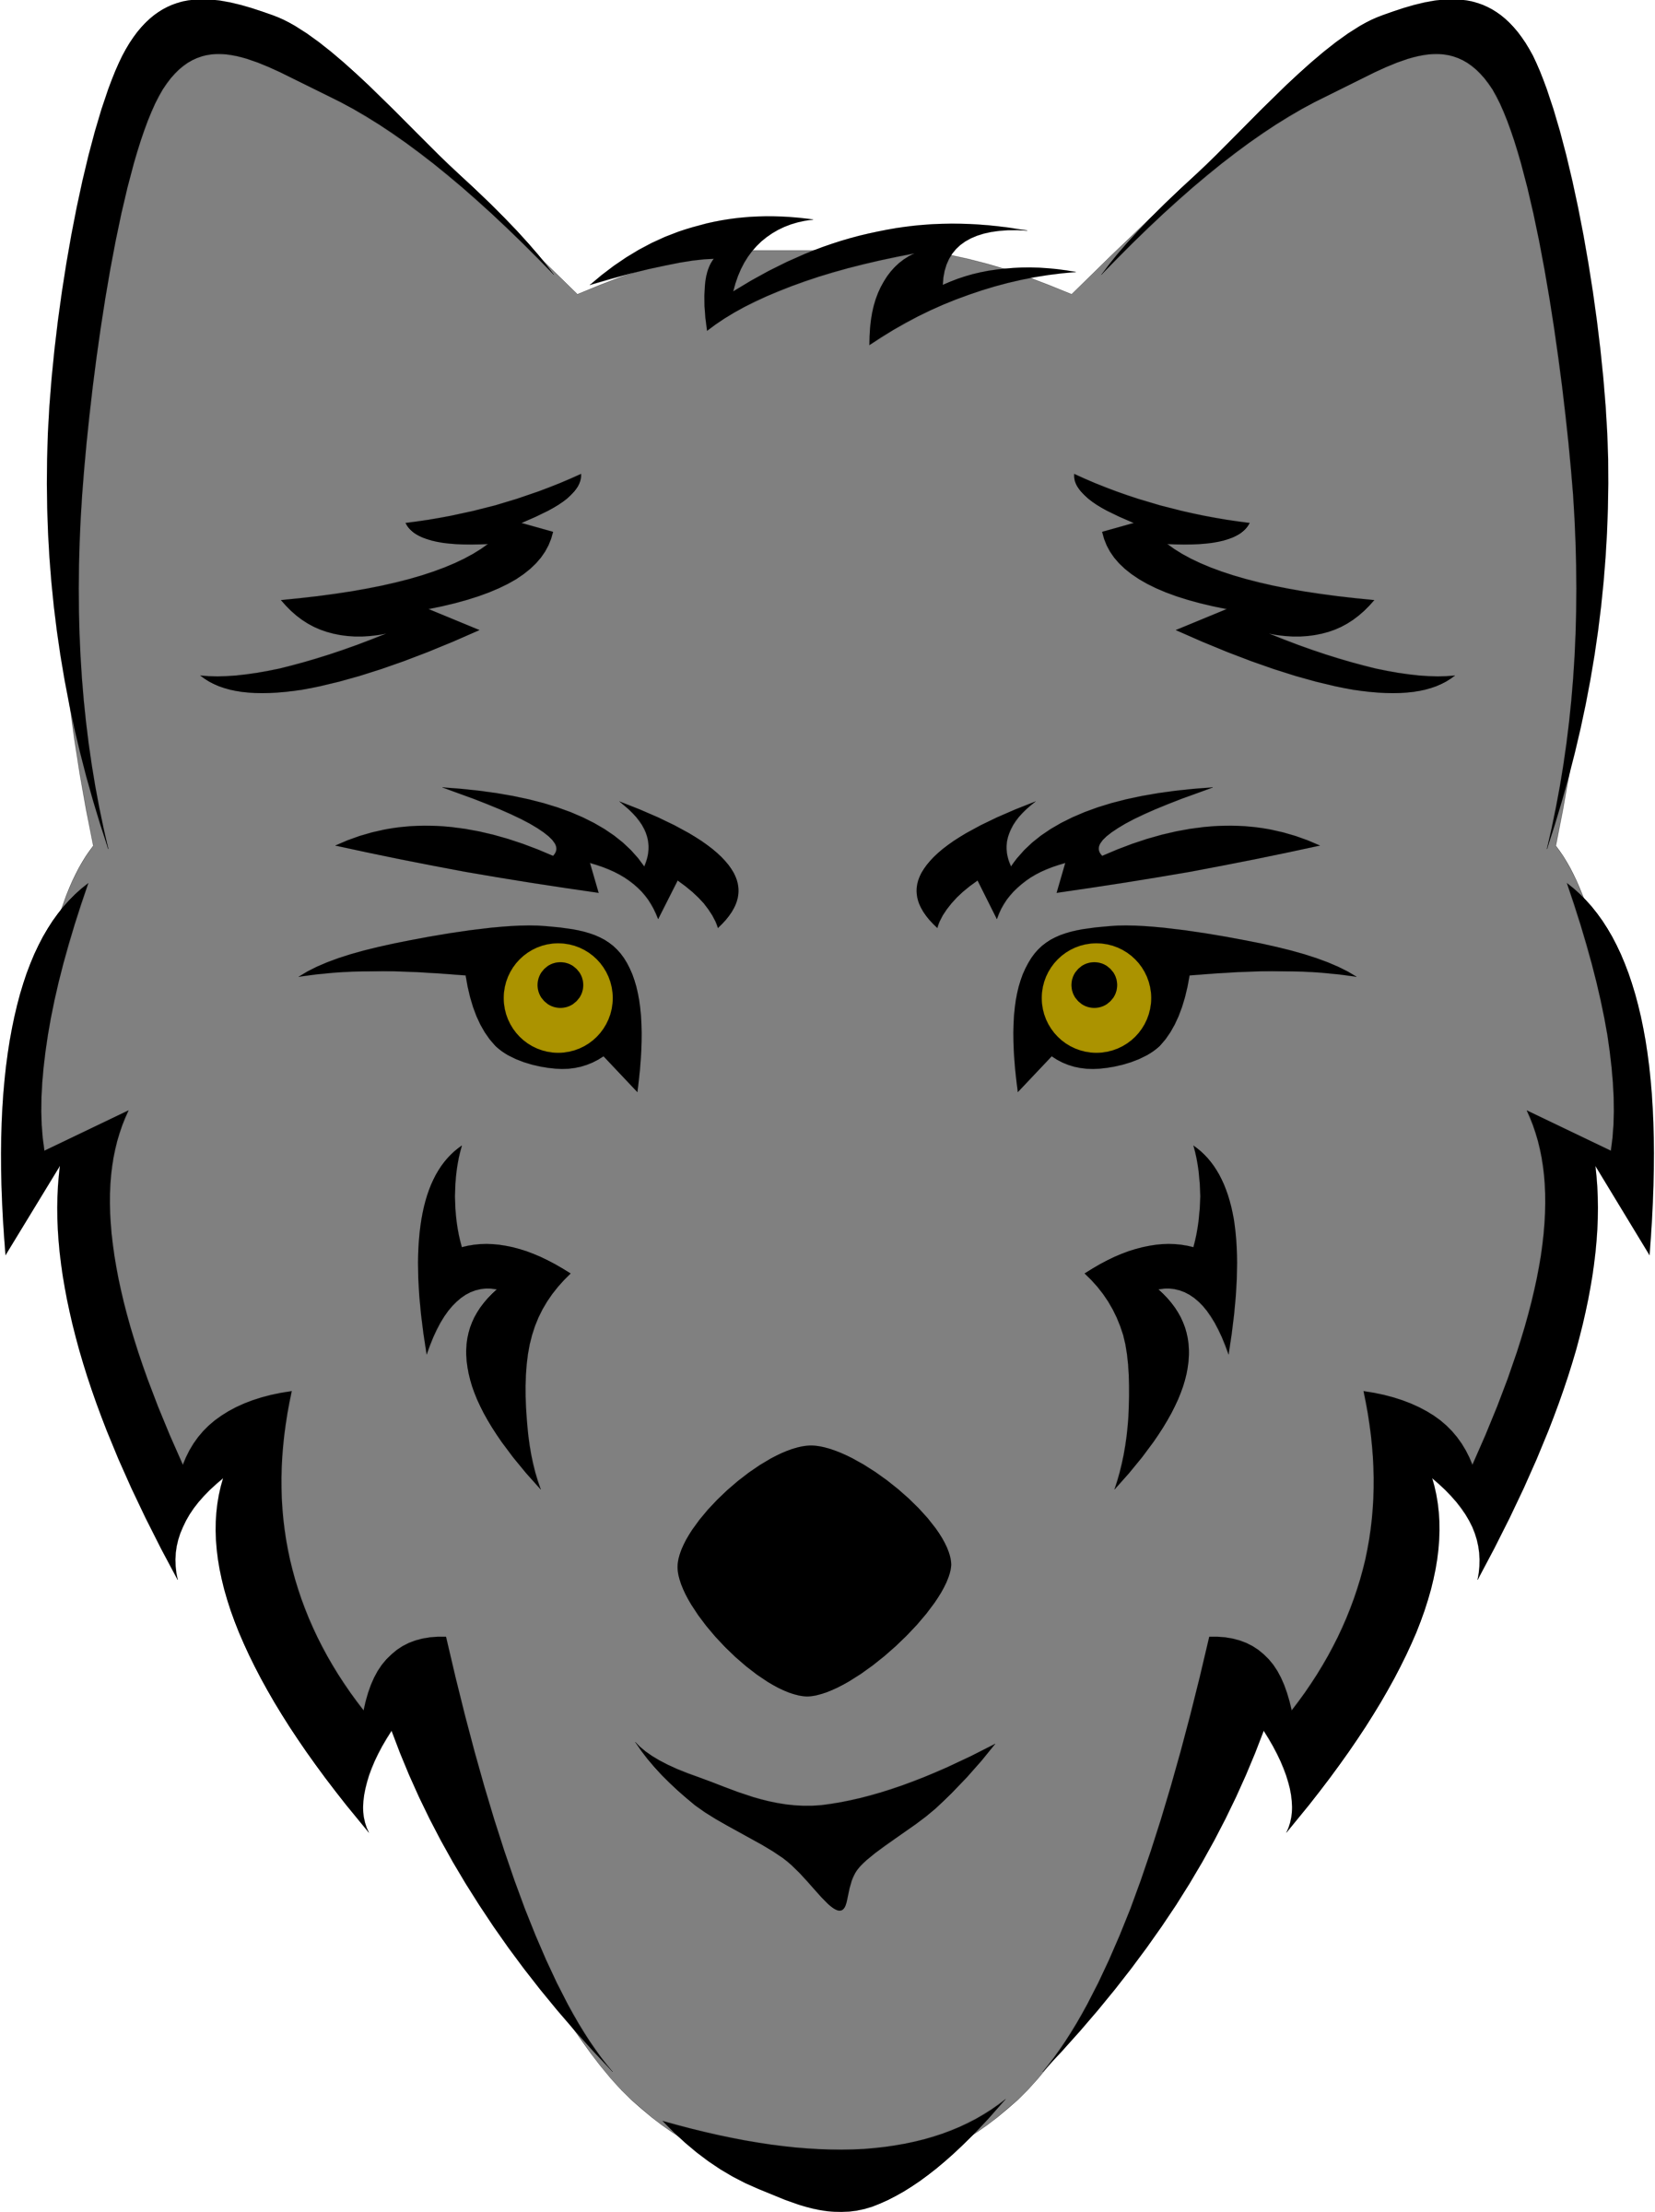 Wolf head stylized big. Wolves clipart wold